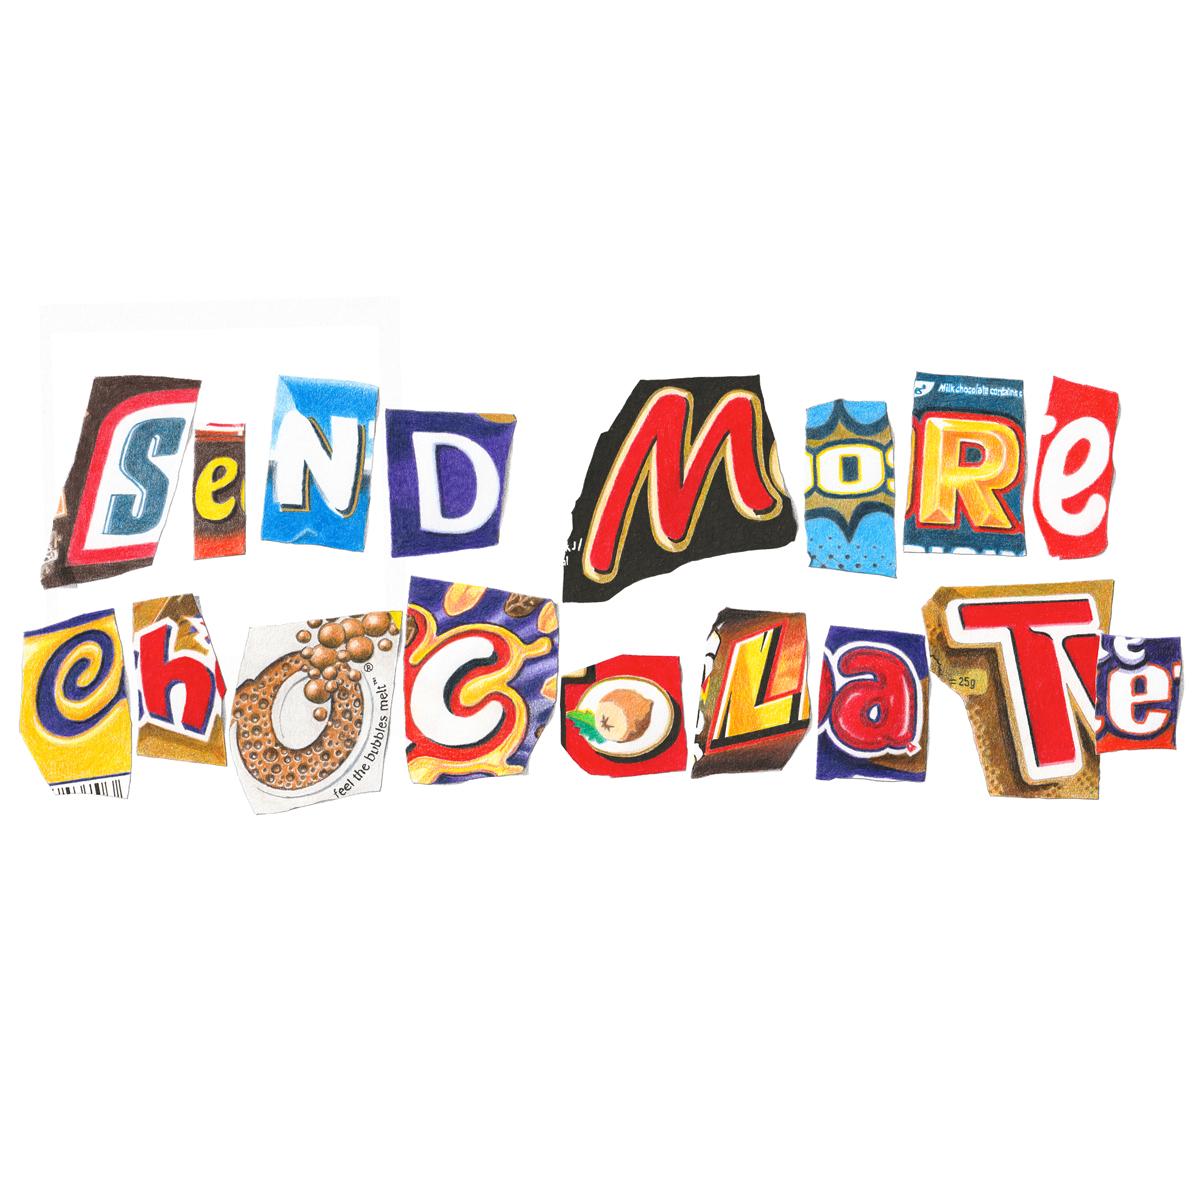 Limited edition print (smaller version) of drawing of cut-out letters - Send More Chocolate.